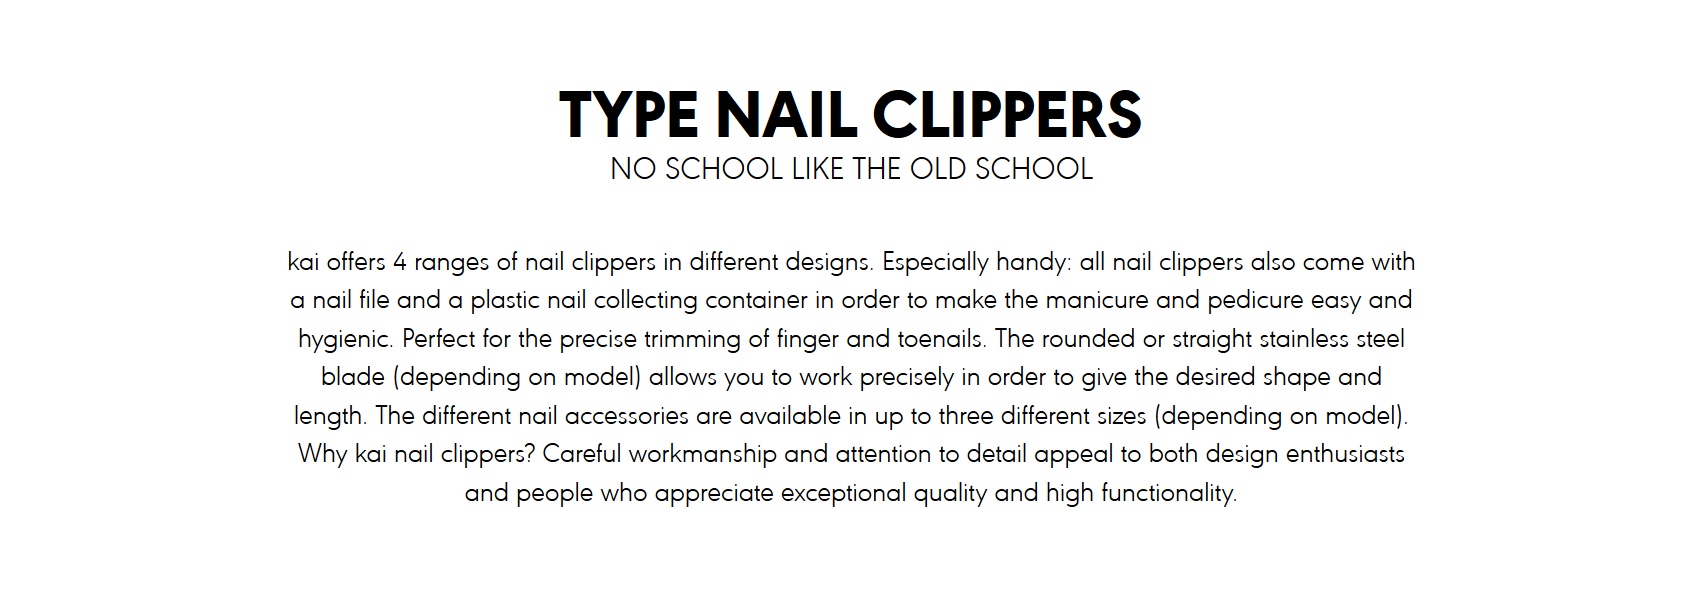 type nail clippers